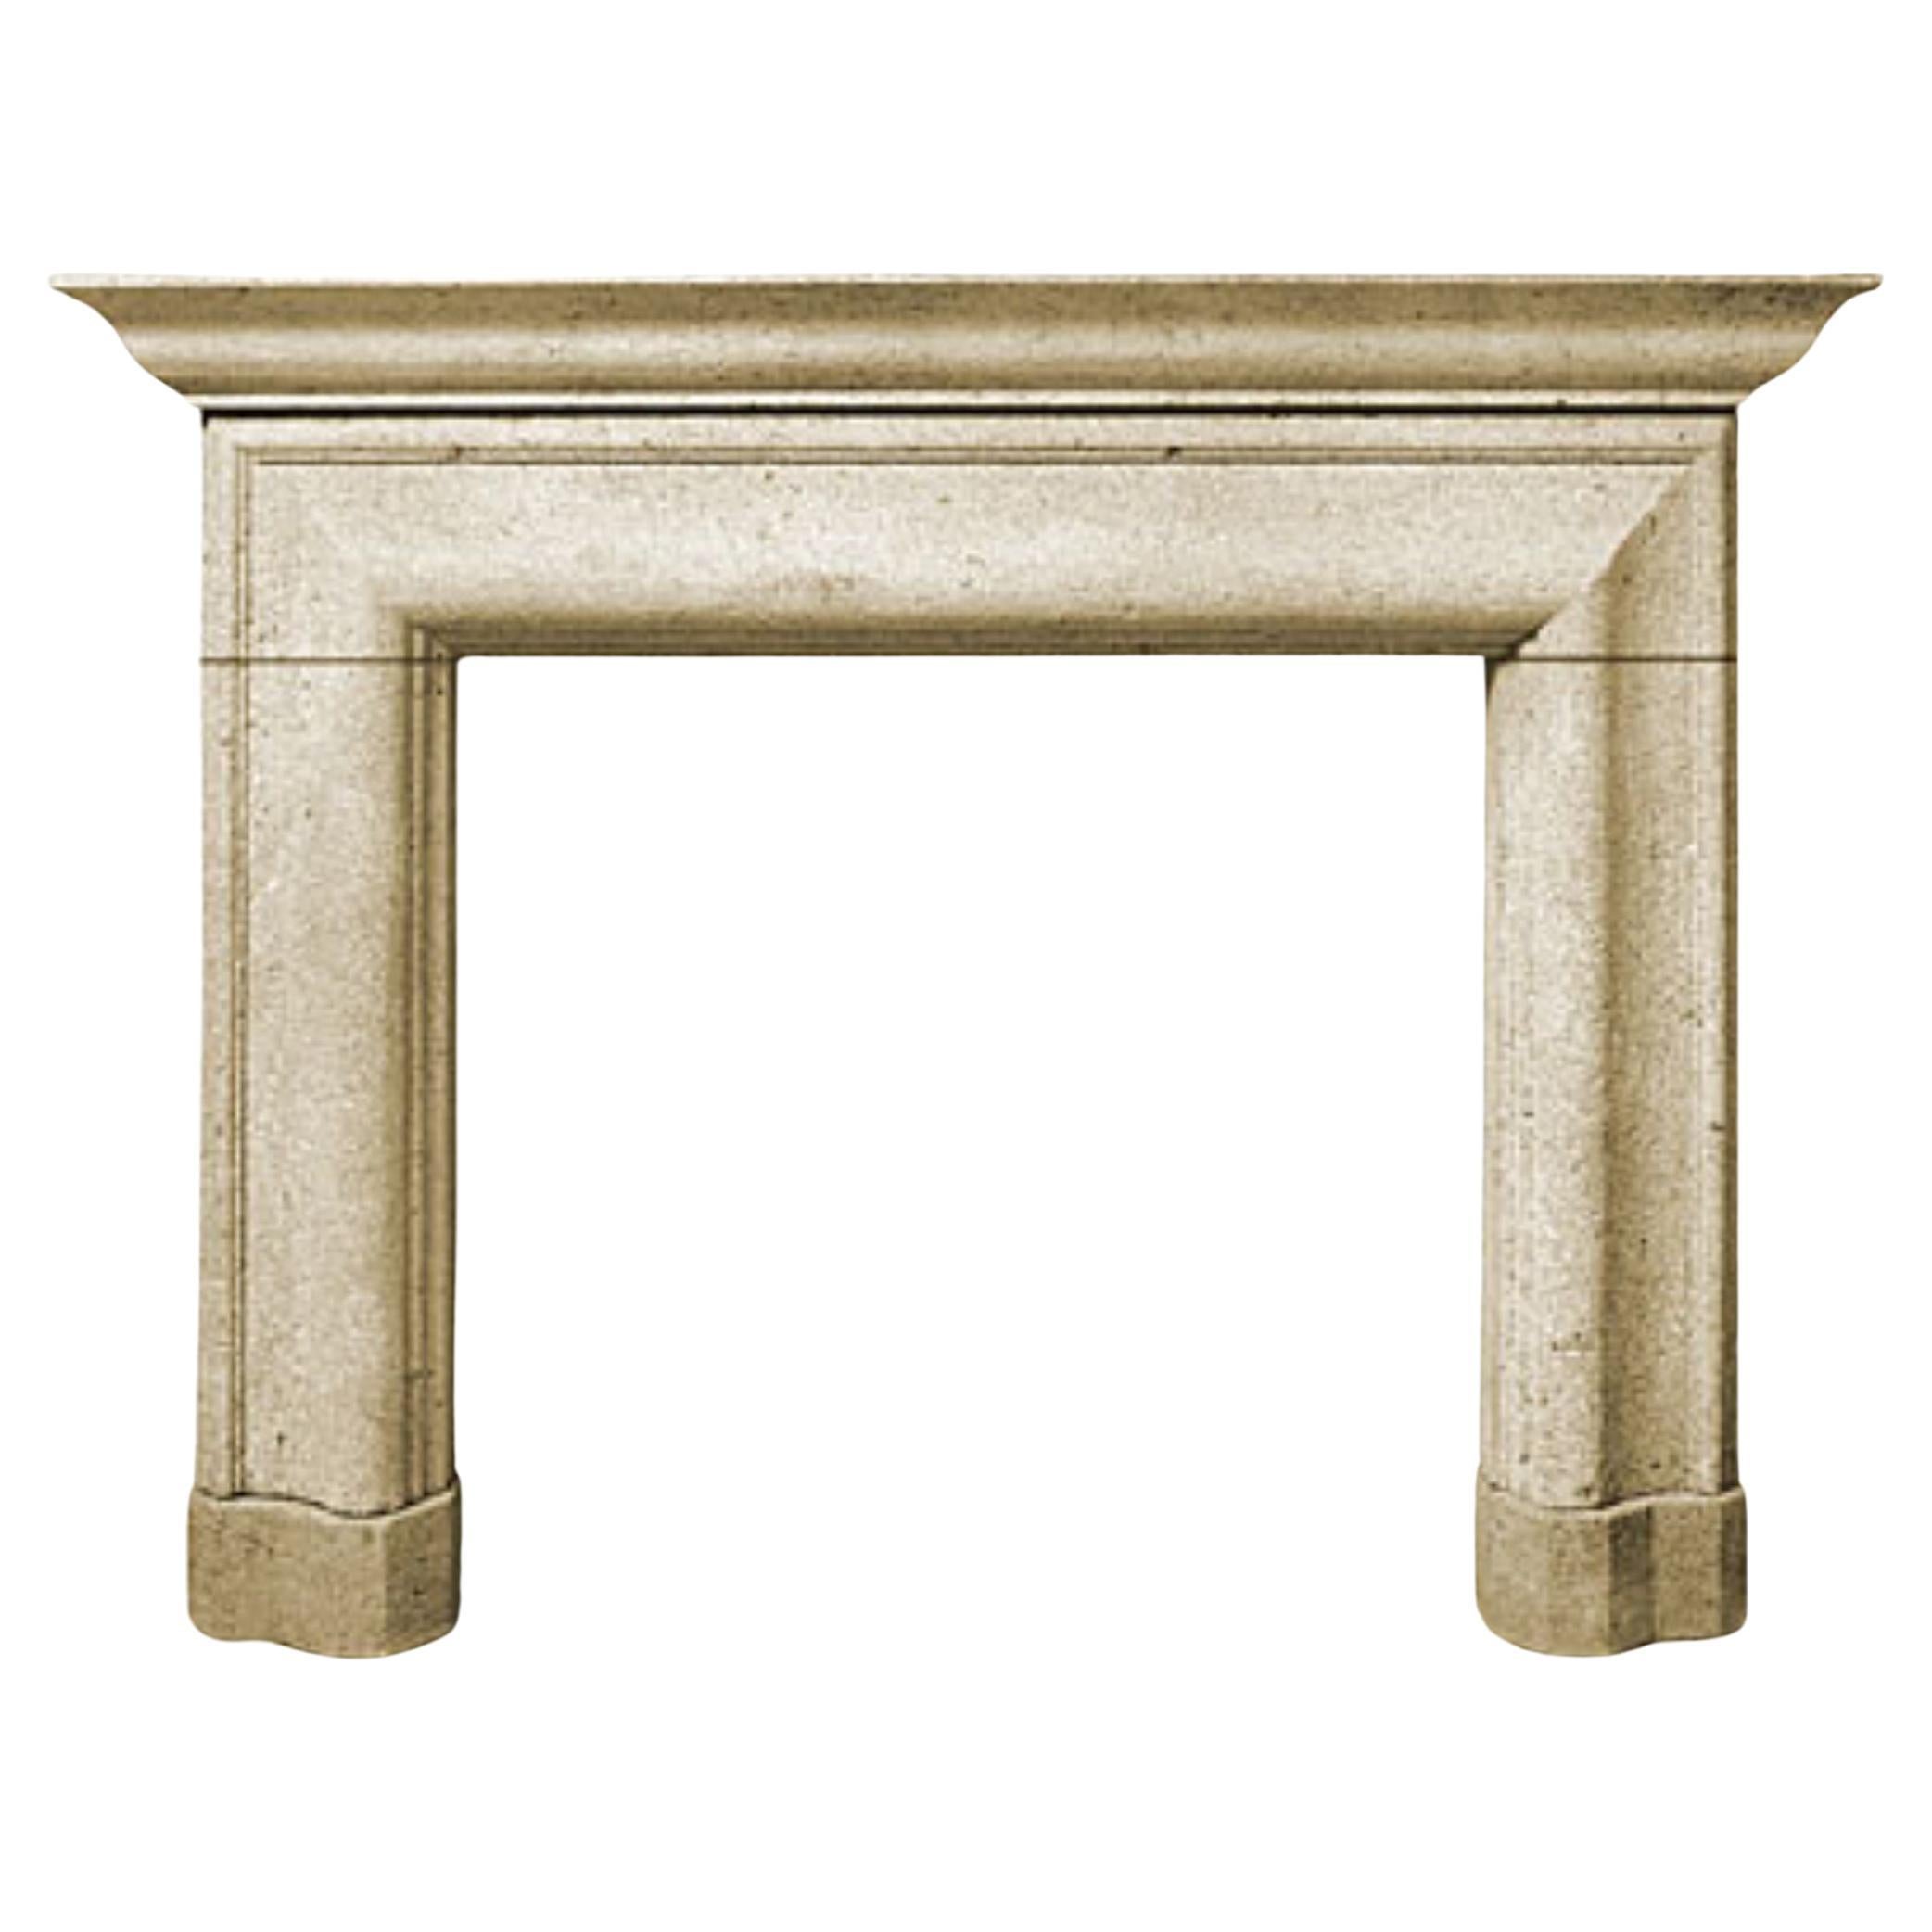 The Bolection B: A Classical Stone Fireplace Profile with Shelf and Plinths For Sale